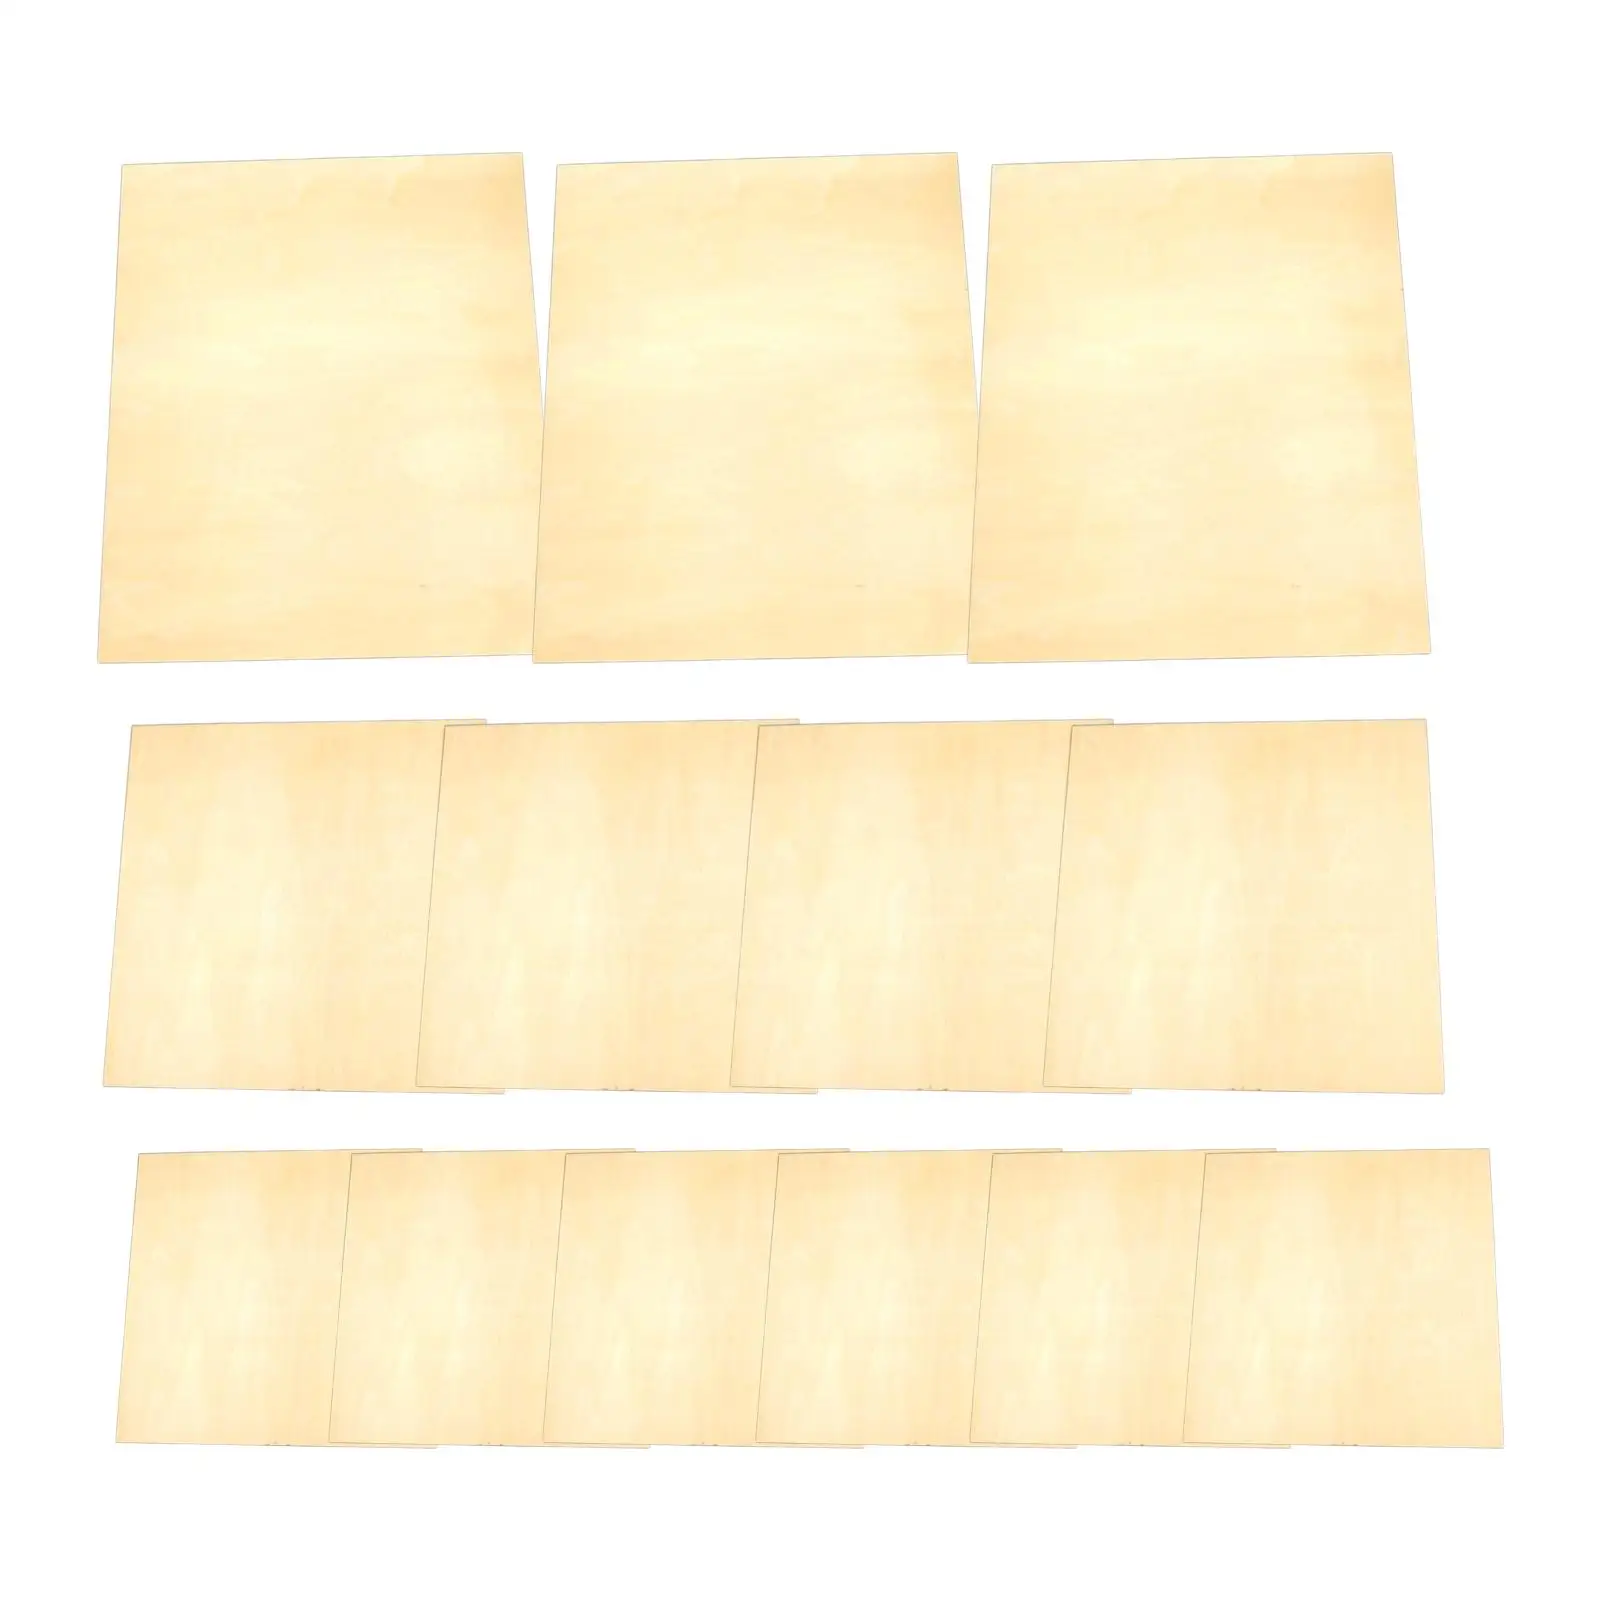 12Pcs/Set Wooden Panel Boards Unfinished Wood Veneer Sheets Painting Supply Painting Board DIY 3 Sizes for Painting Drawing Wall